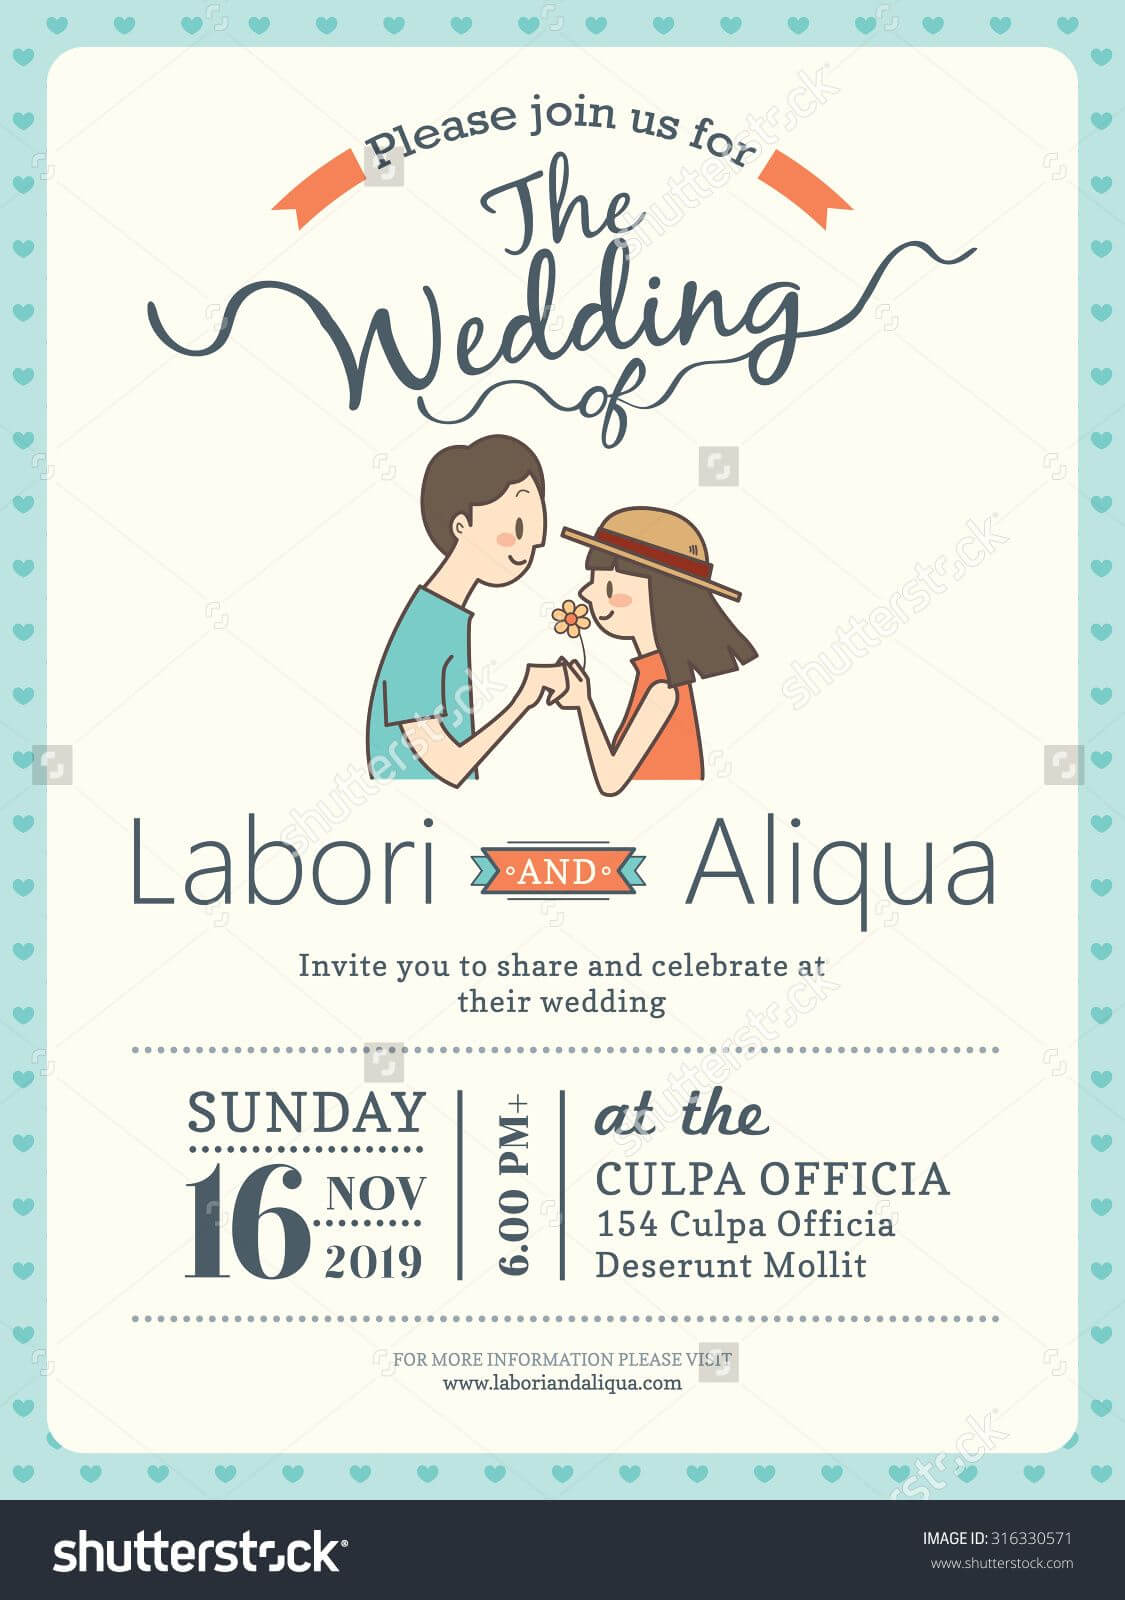 Wedding Invitation Card Template With Cute Groom And Bride In Free E Wedding Invitation Card Templates